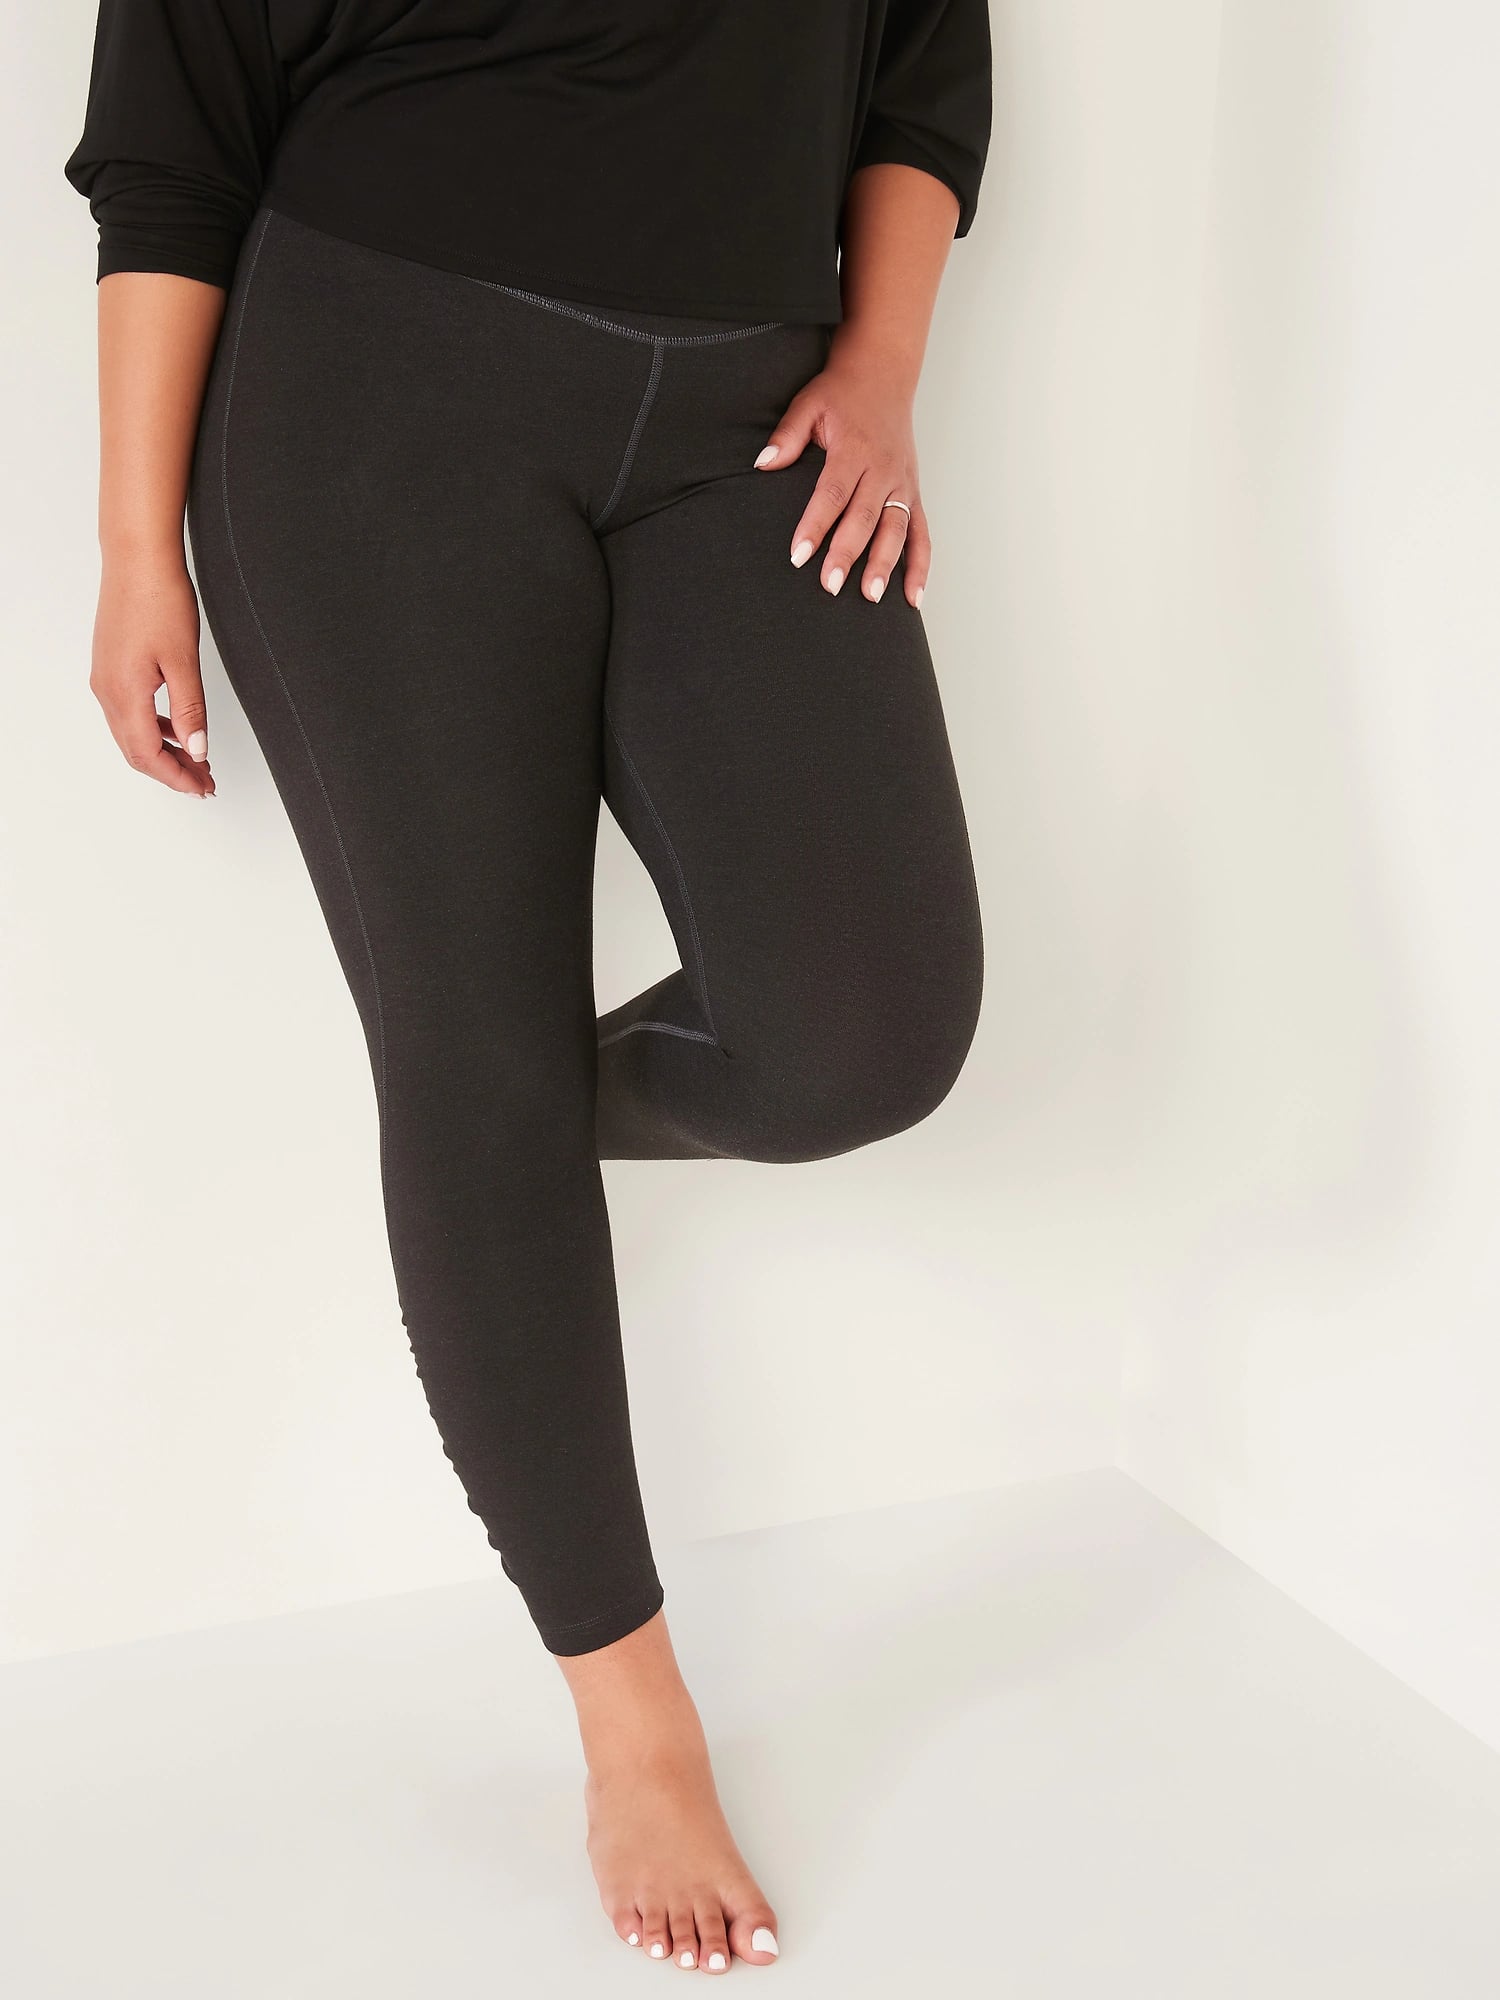 Old Navy Extra High-Waisted PowerChill Ruched 7/8-Length Leggings — Weeping  Willow, Trust Me, These Are the Best Petite Leggings When You Want  Something Soft That Stays Up